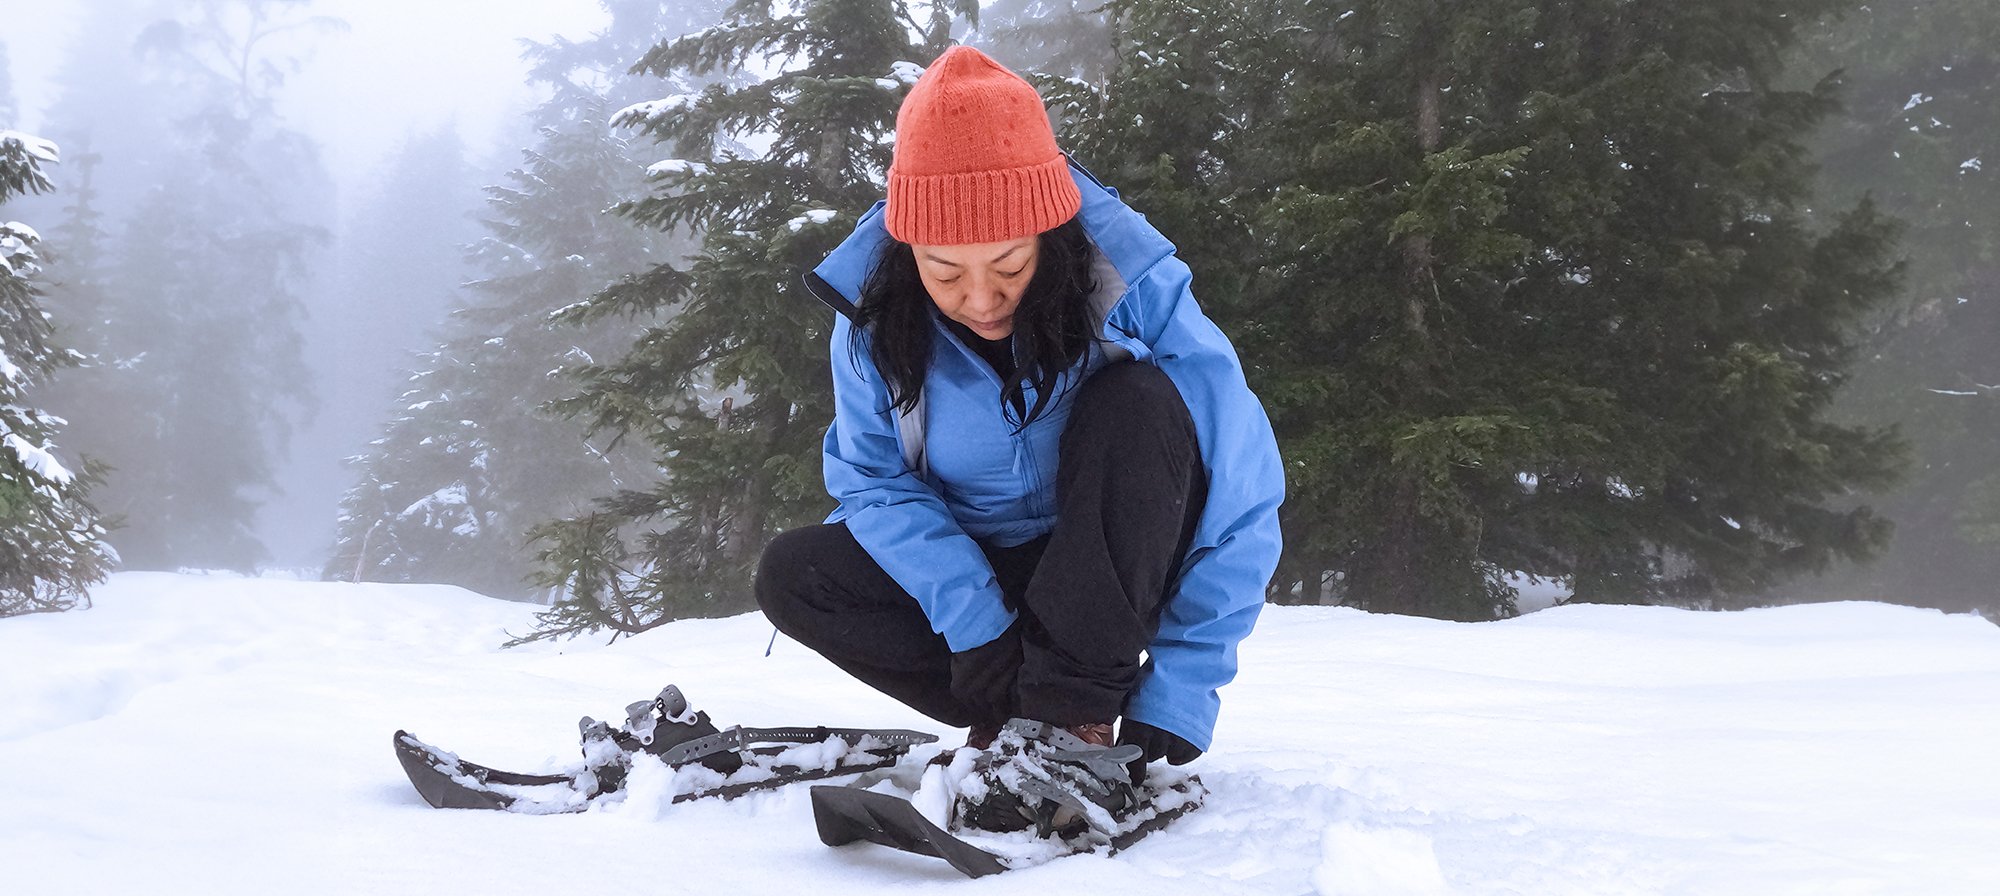 9 Inspiring Ways to Stay Active in Cold Weather